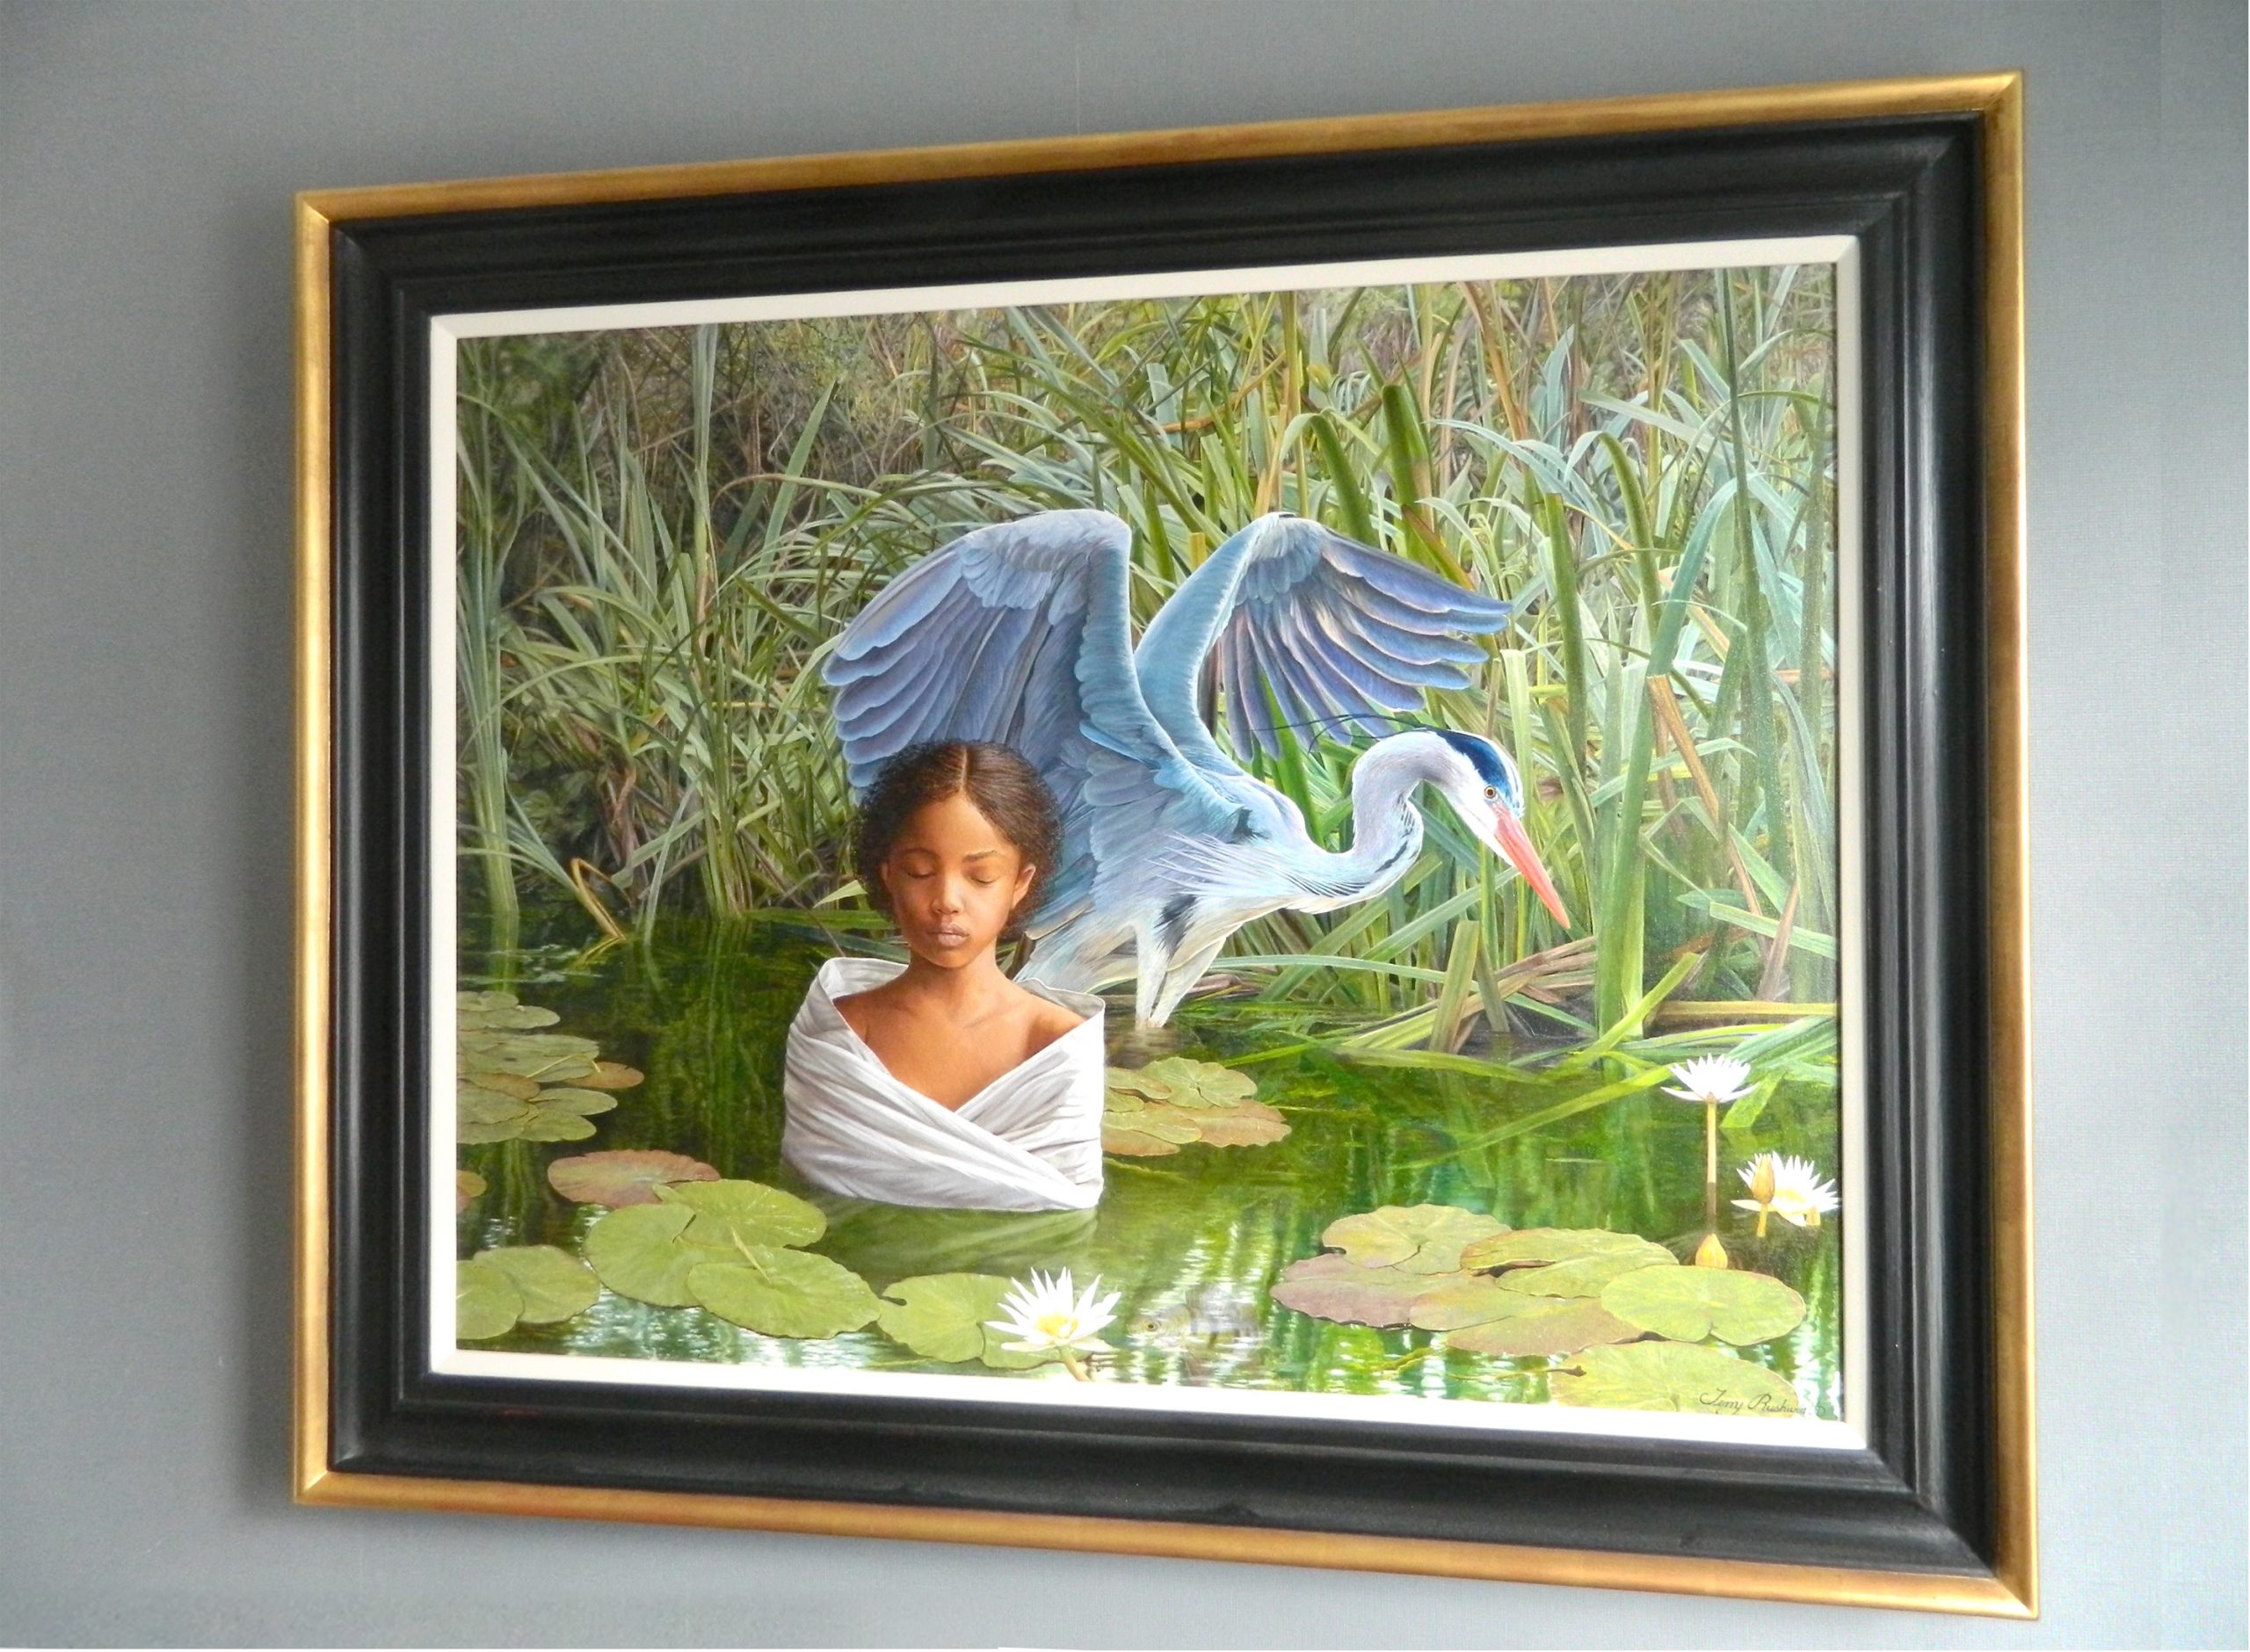 THE GIRL AND THE HERON FRAMED